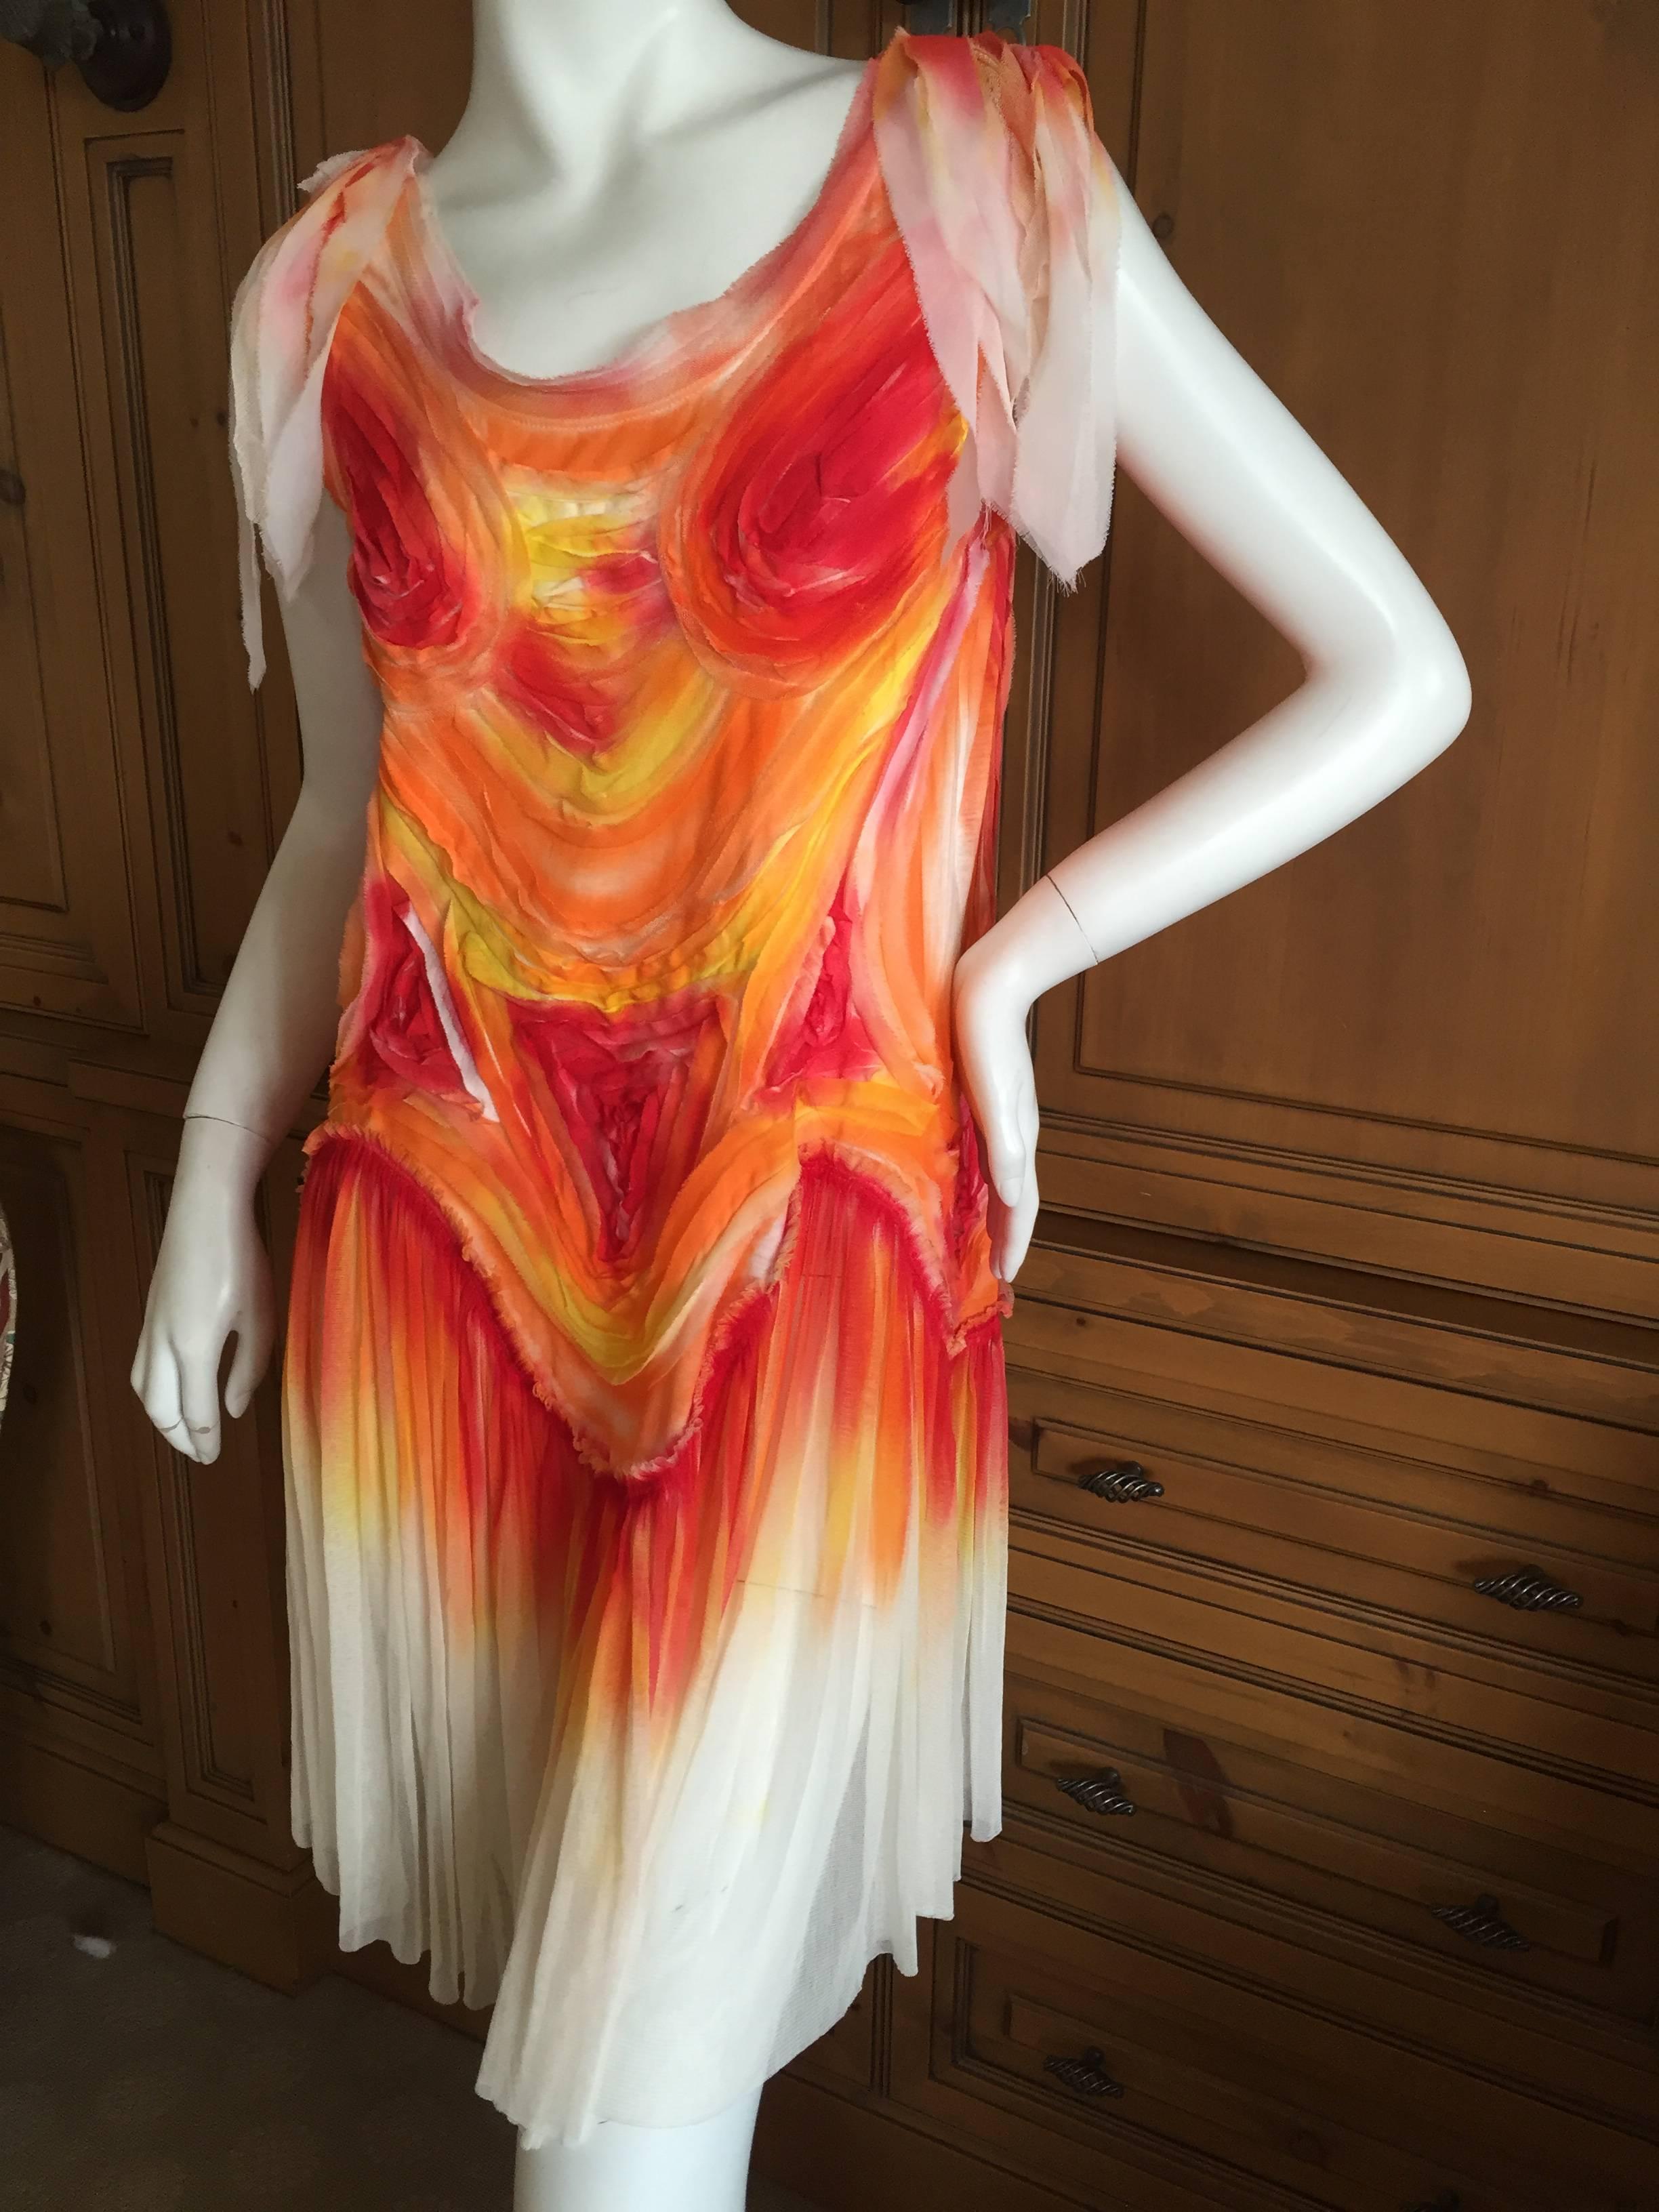 Unusual tie dye silk dress from Issey Miyake.
Created of wildly colorful silk in shades of yellow orange and red, evocative of fire.
Size 3, there is som e stretch in this .
Bust 39